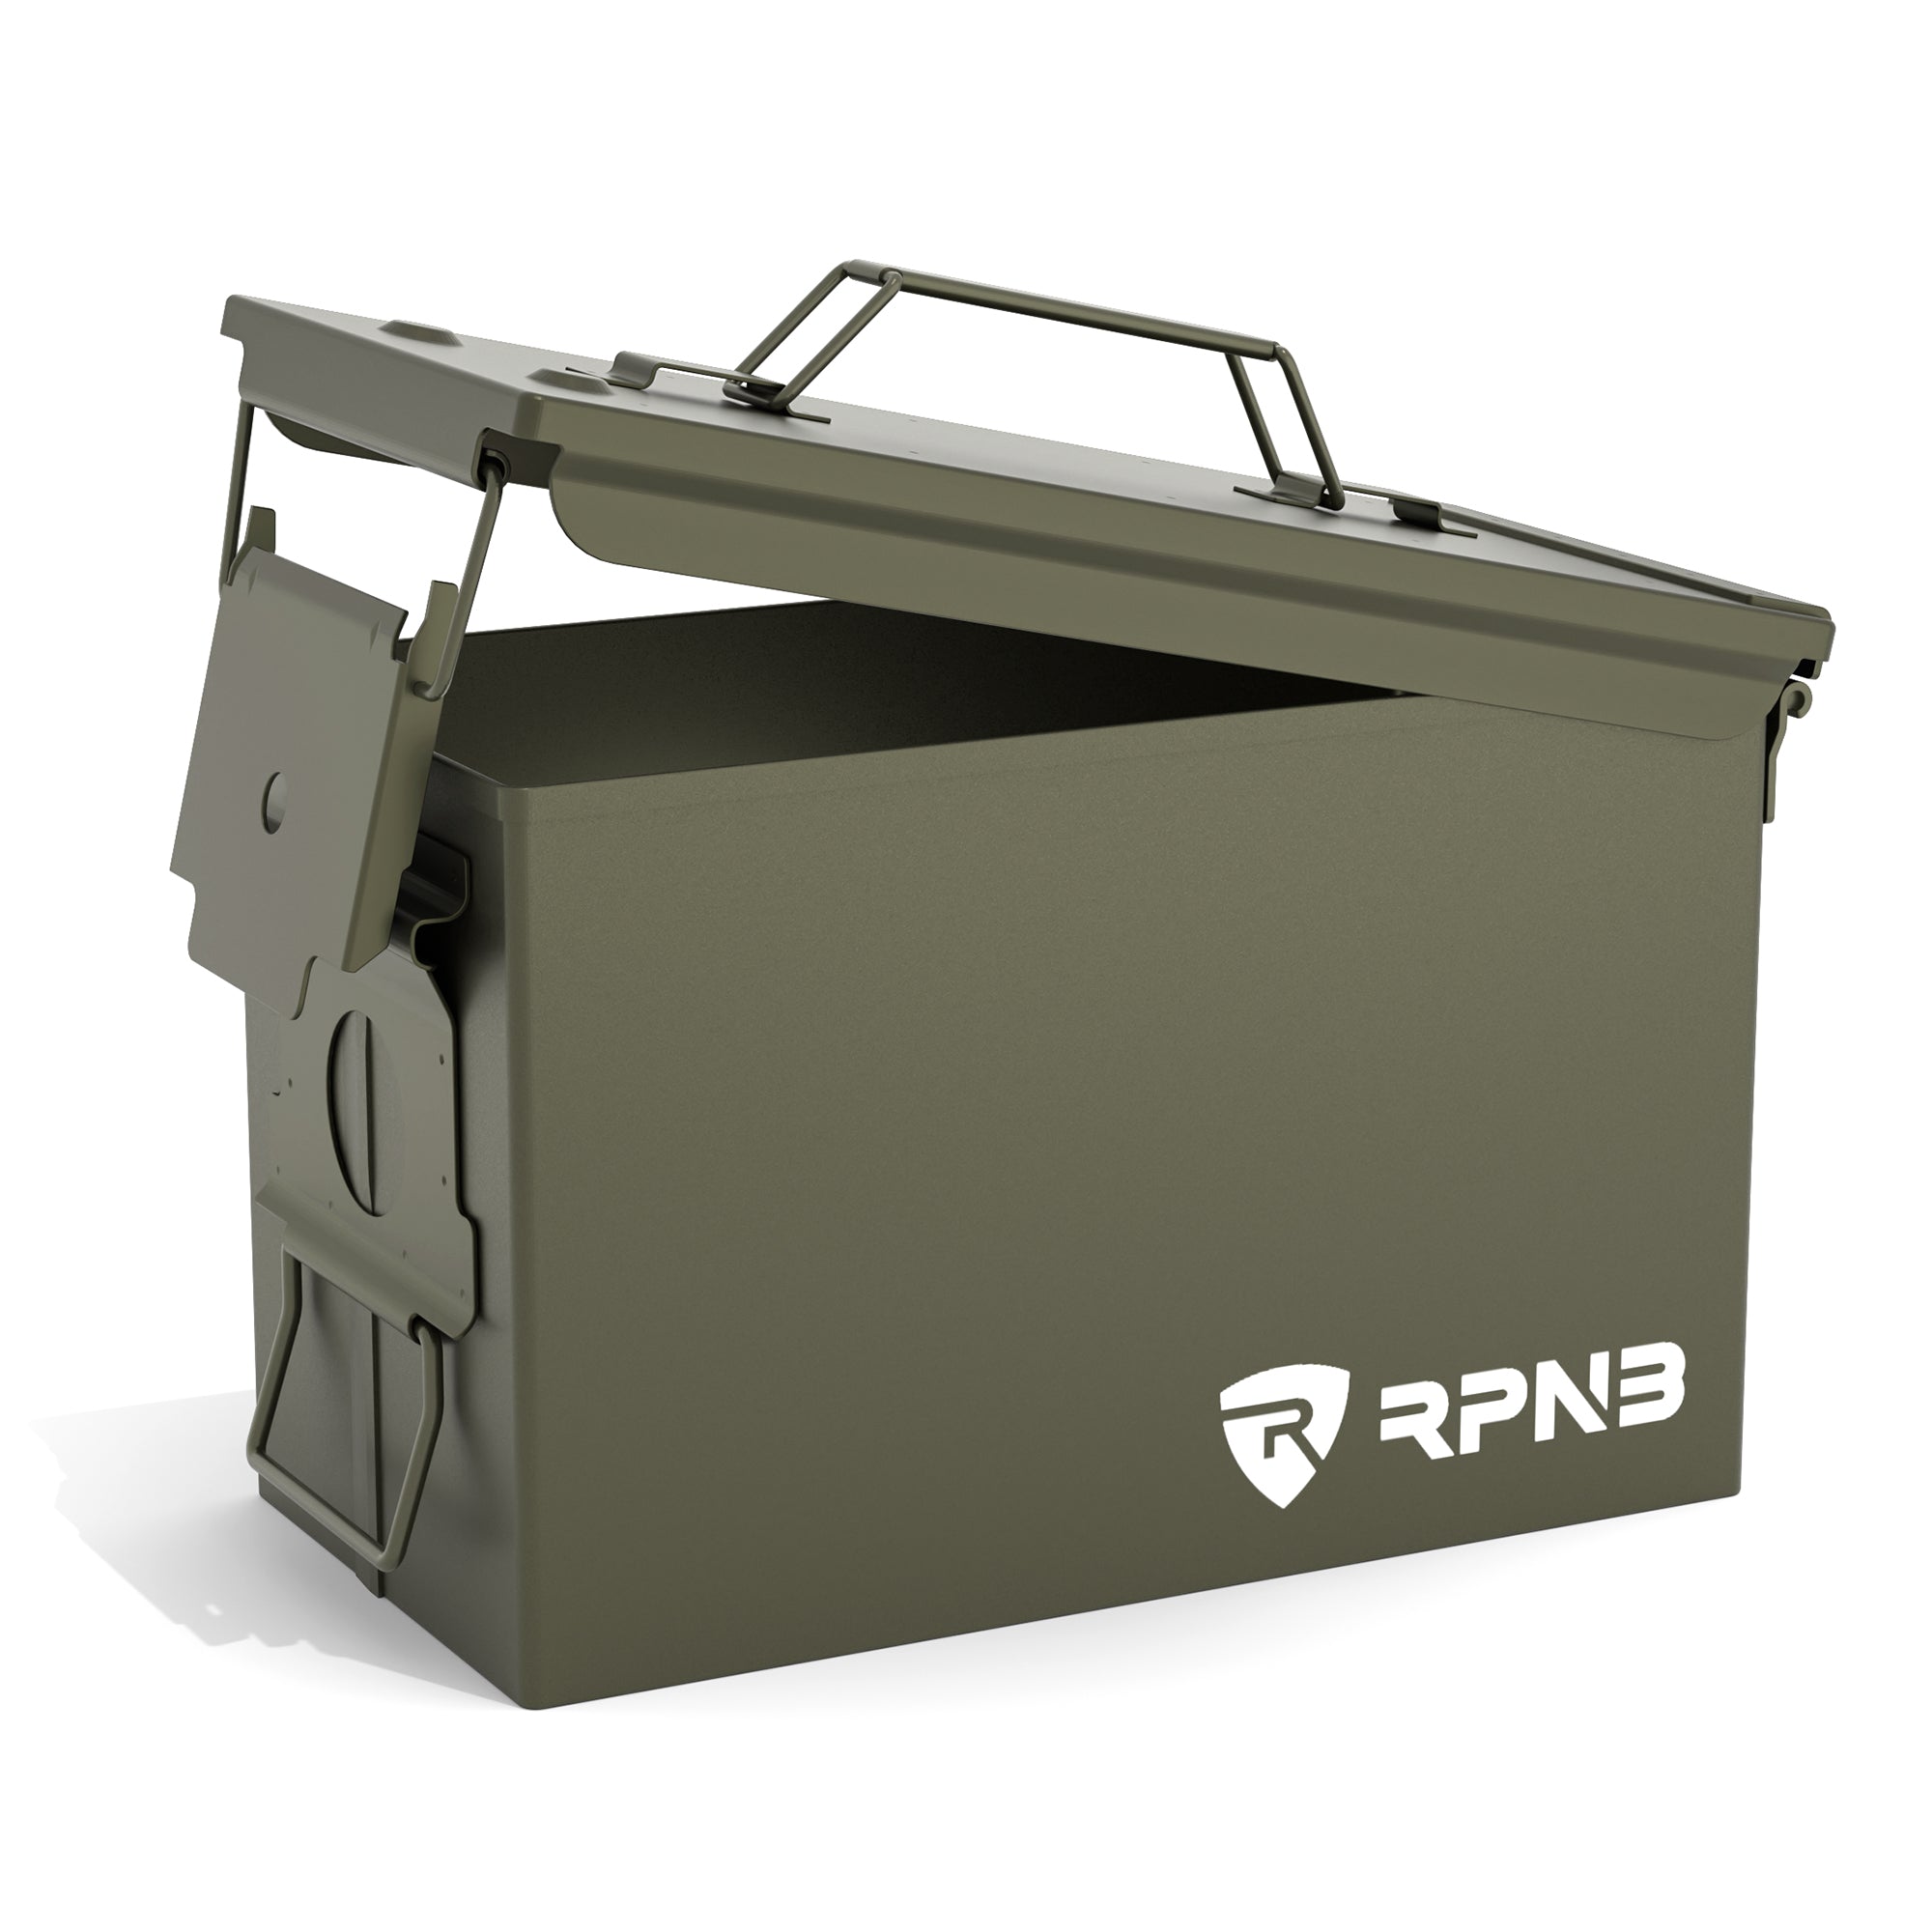 RPNB AM192 Metal Ammo Can .50 Cal Military Heavy Gauge Water Resistant Ammo Box